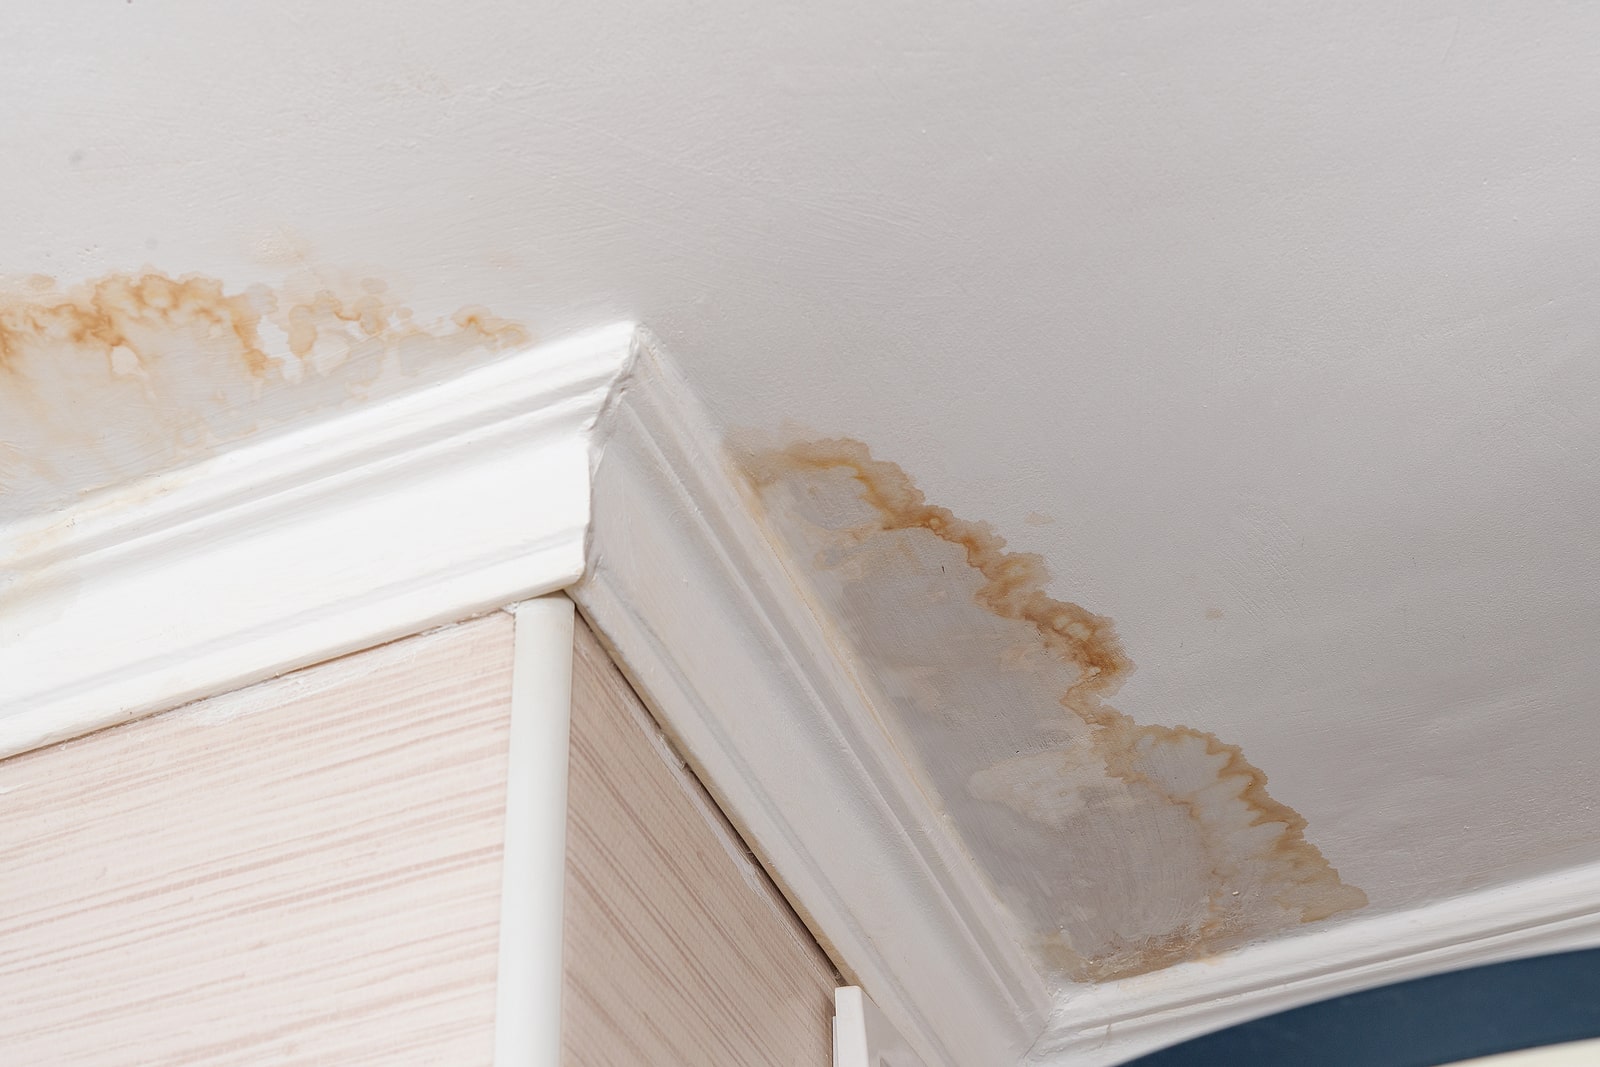 Steps to repair ceiling drywall after a leak: